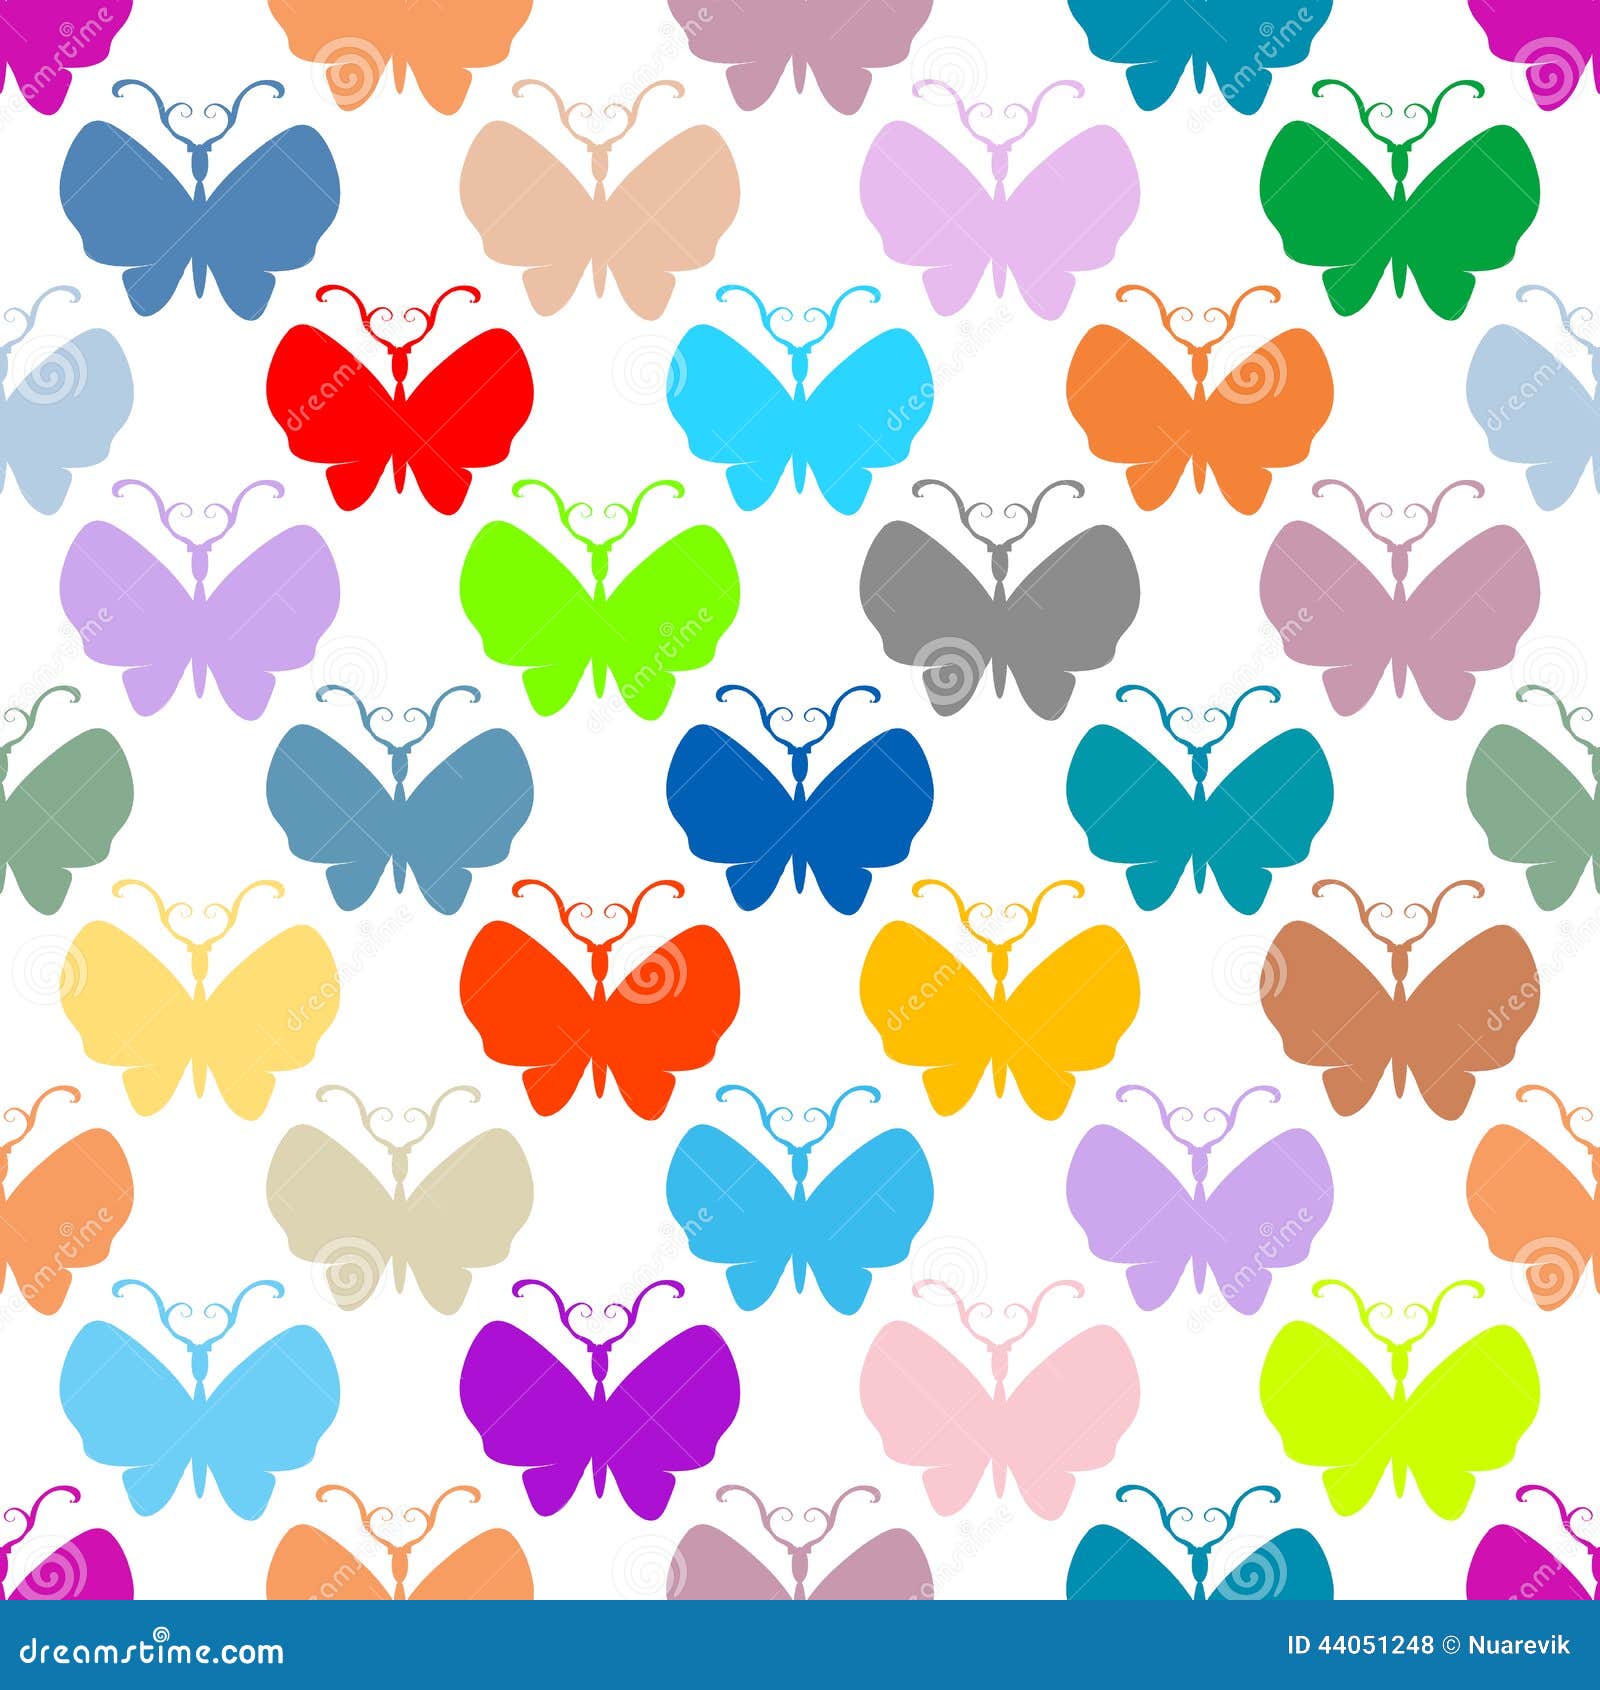 Butterfly Multicolor Silhouettes Seamless Pattern Stock Illustration ...